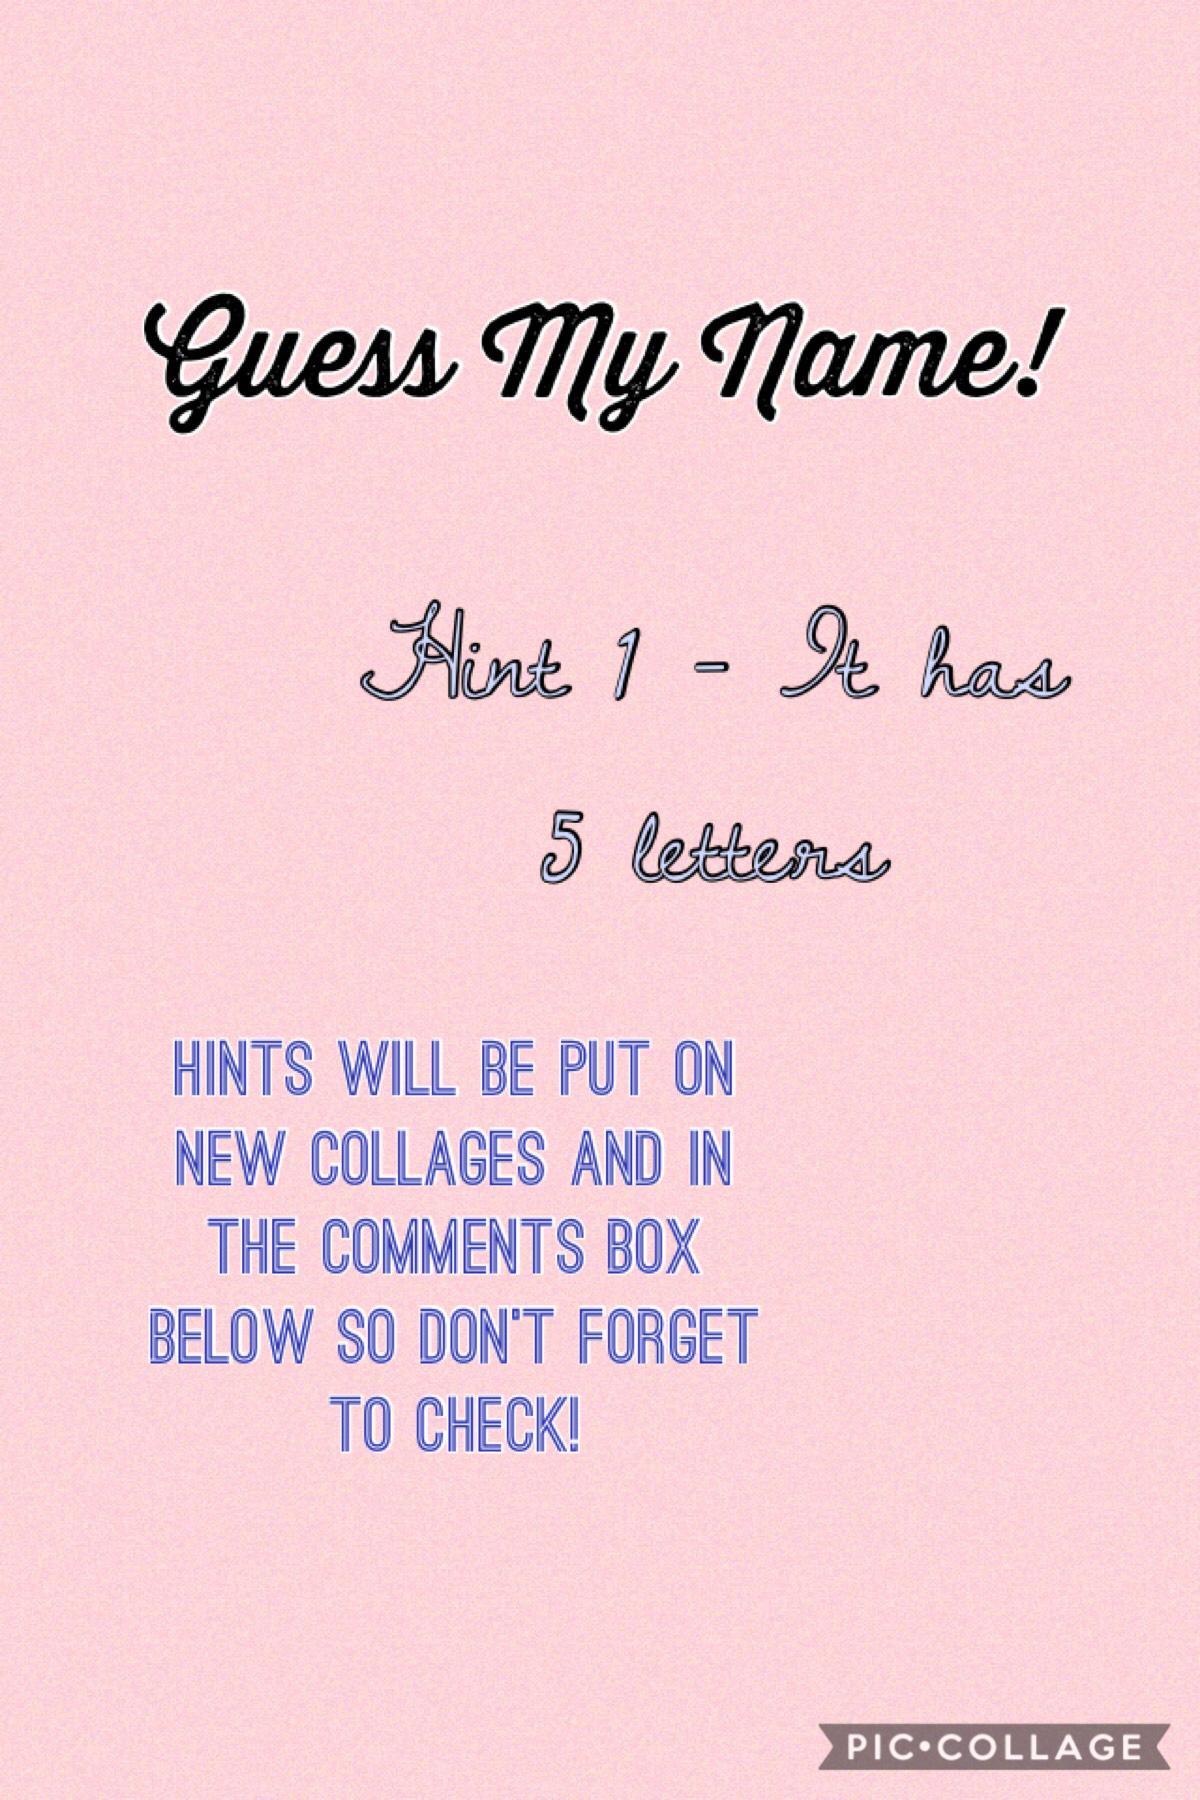 Hint 2 - It begins with the letter C